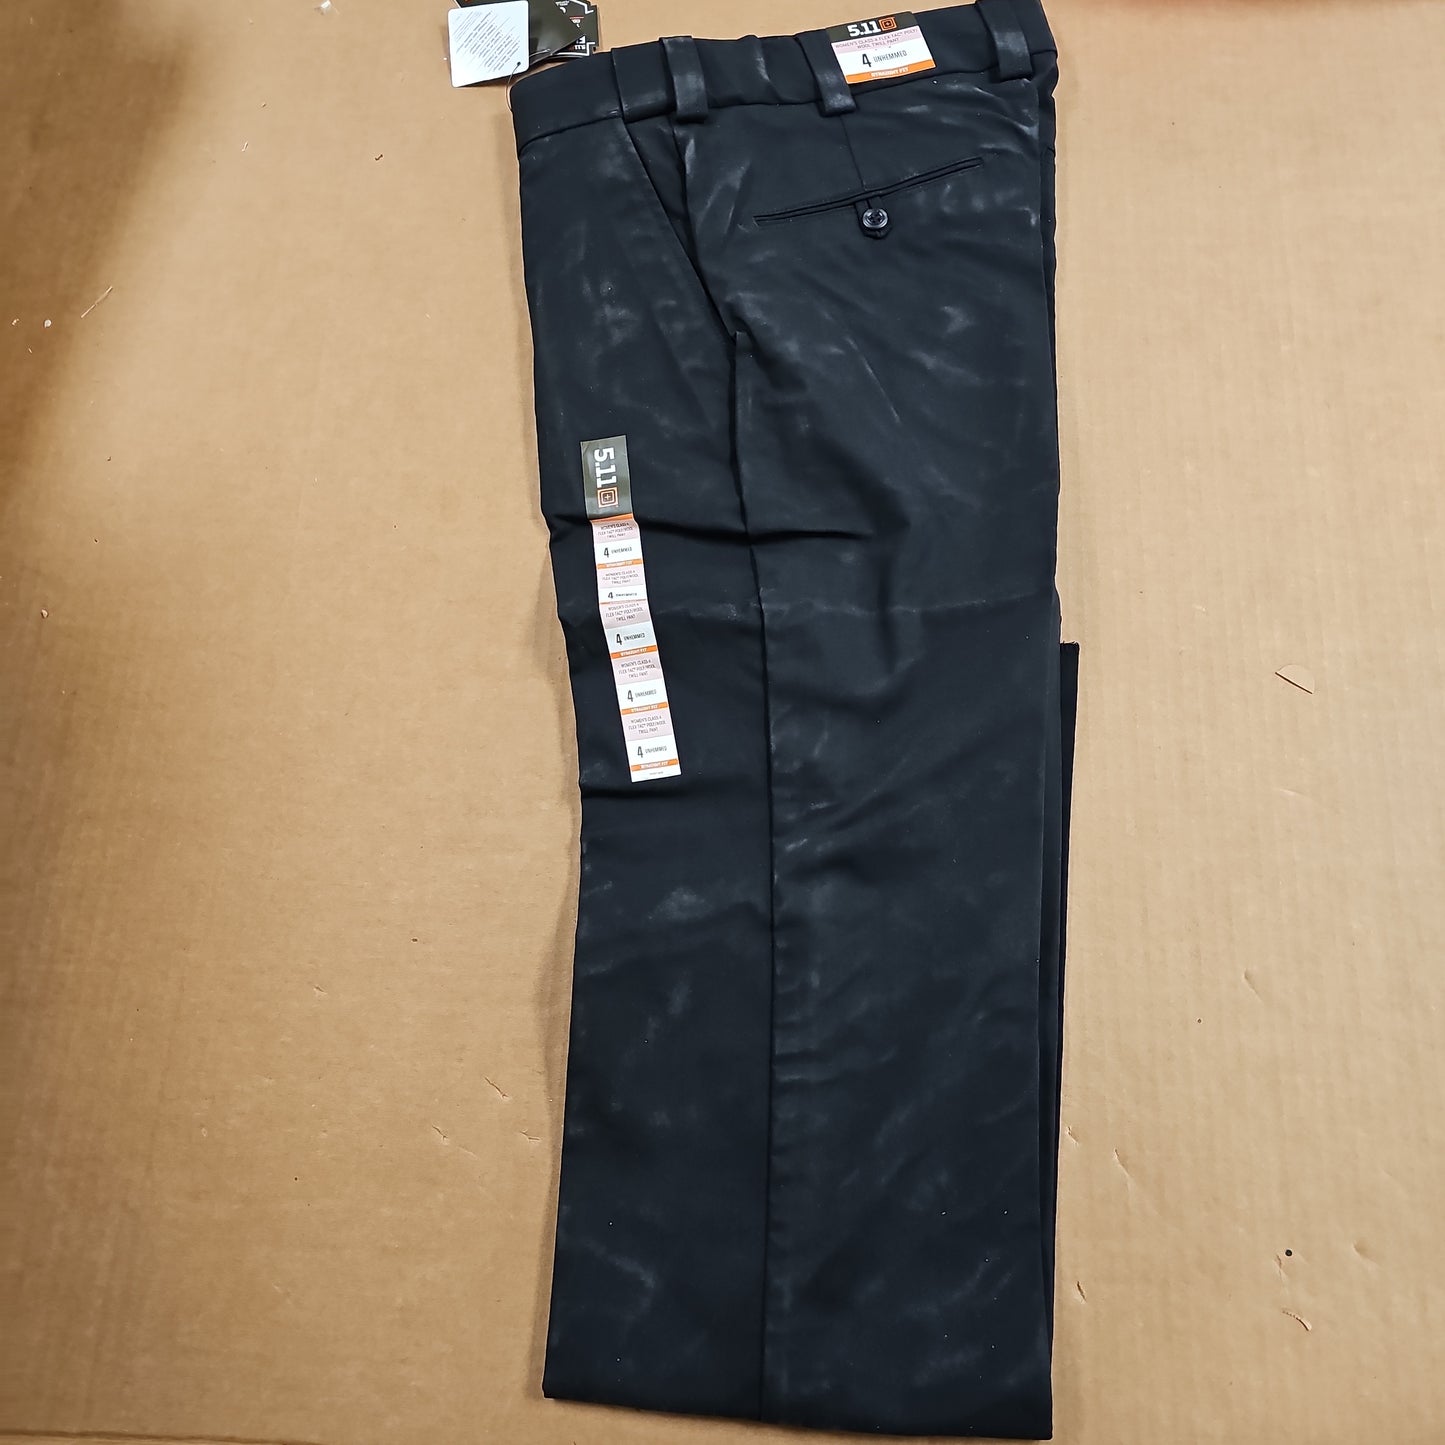 5.11 Tactical Pant Womens Twill FT Polywool Class A Black Size 4 64424-019-4